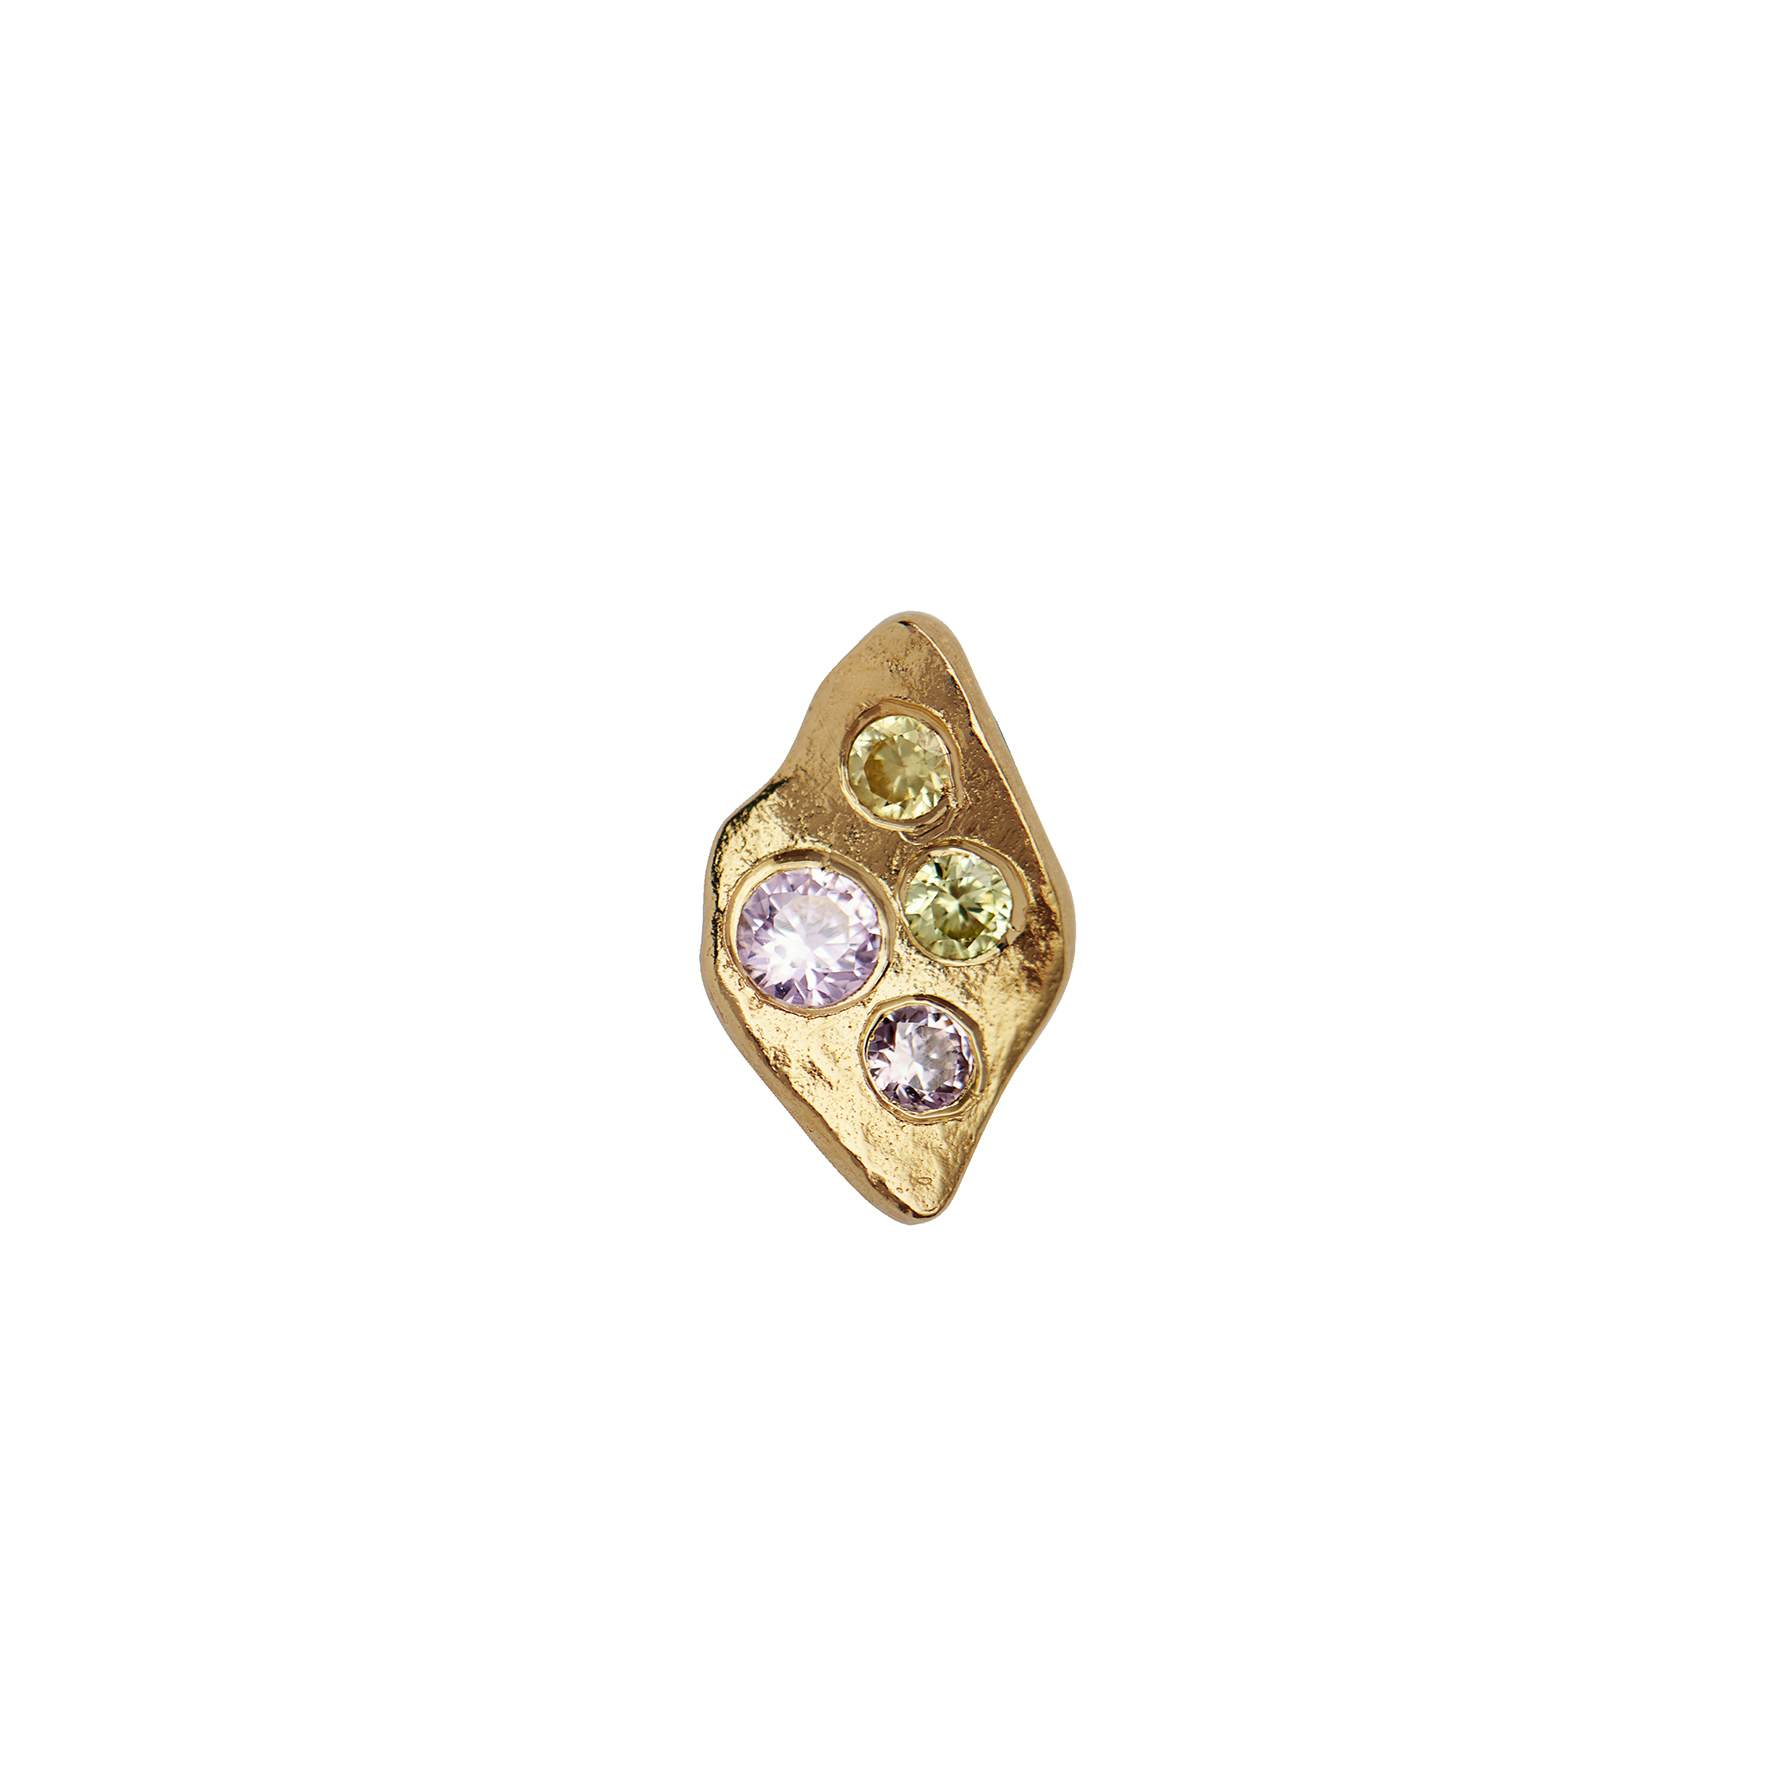 Petit Ile De L'Amour With Stones Earstick - Light Pink Sorbet von STINE A Jewelry in Vergoldet-Silber Sterling 925